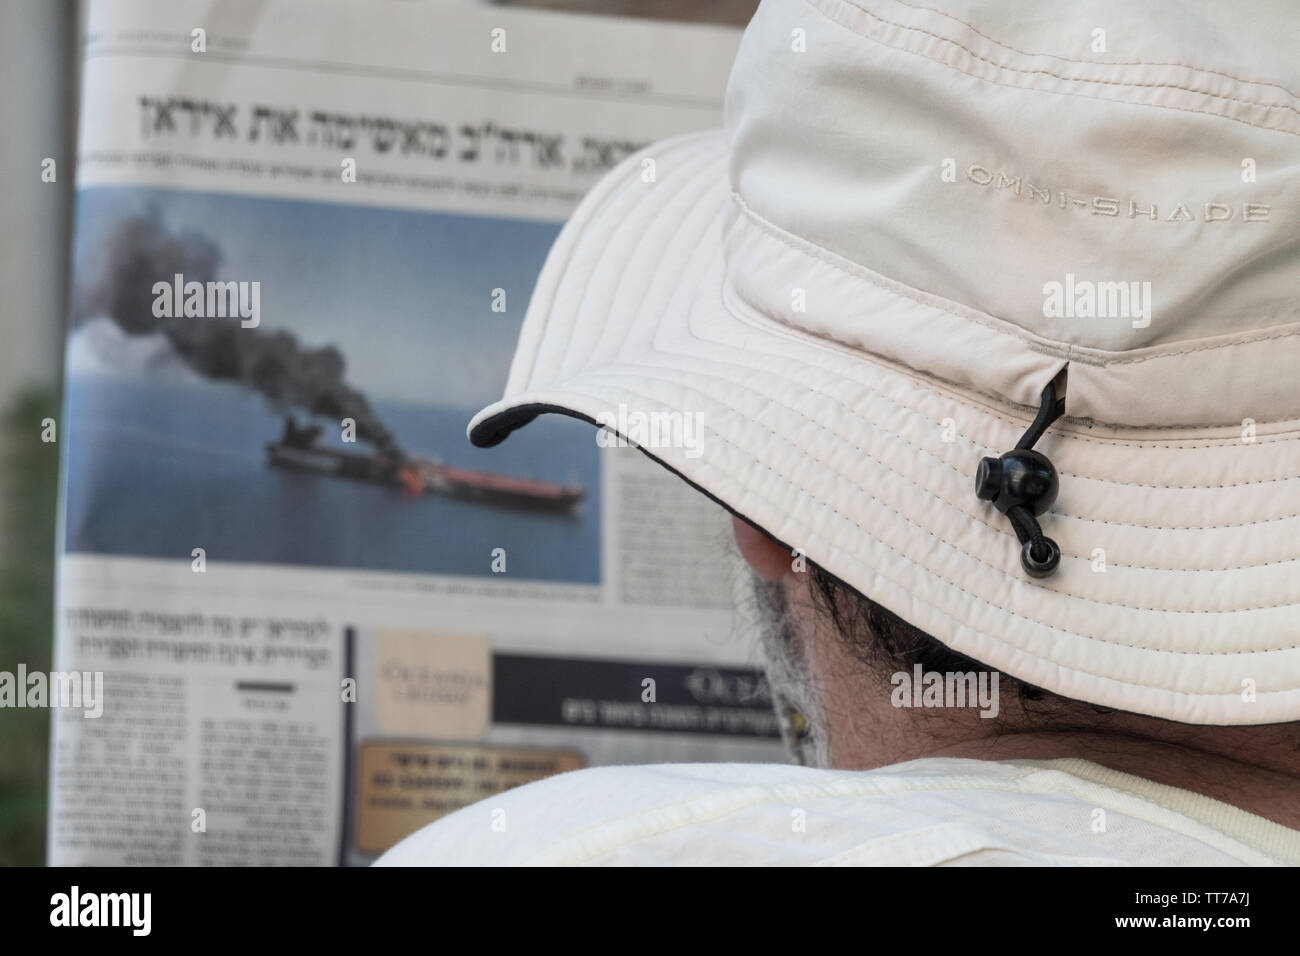 Jerusalem, Israel. 15th June, 2019. An Israeli reads a newspaper article dealing with the Gulf of Oman attack on oil tankers as Israel closely monitors the situation and possible consequences of US Iranian armed conflict. Credit: Nir Alon/ Alamy Live News. Stock Photo